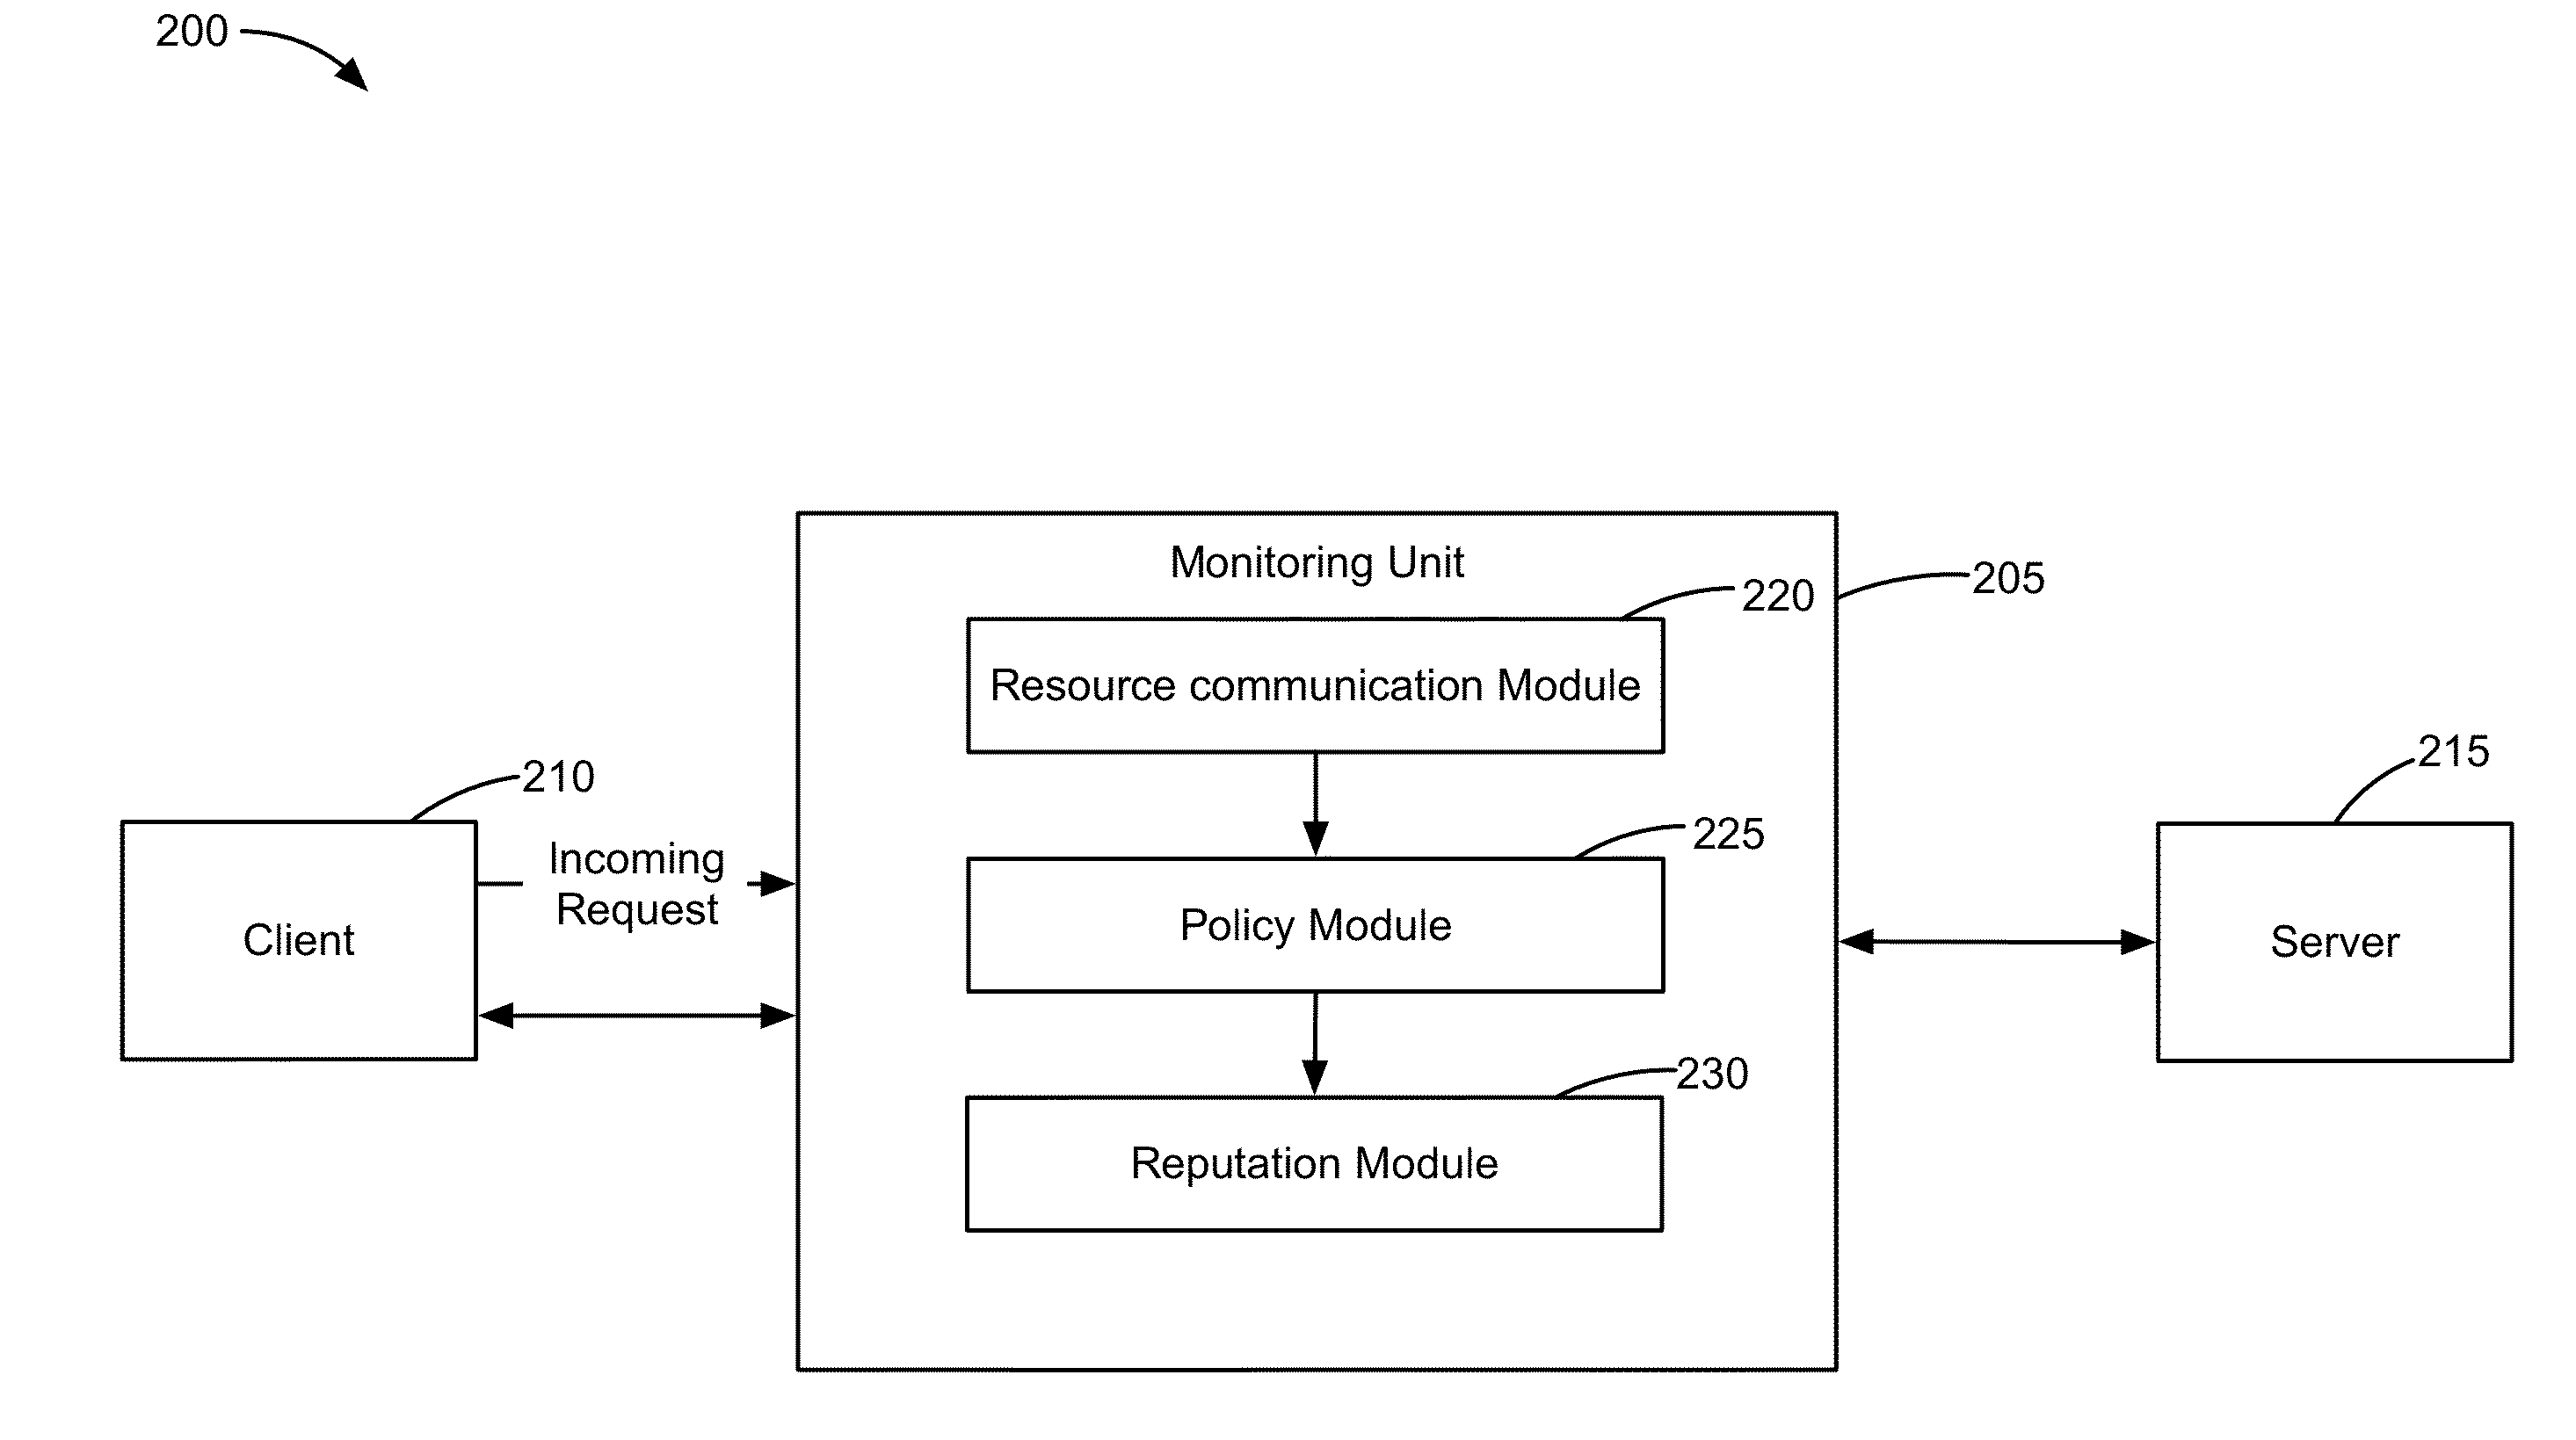 Detecting malicious resources in a network based upon active client reputation monitoring